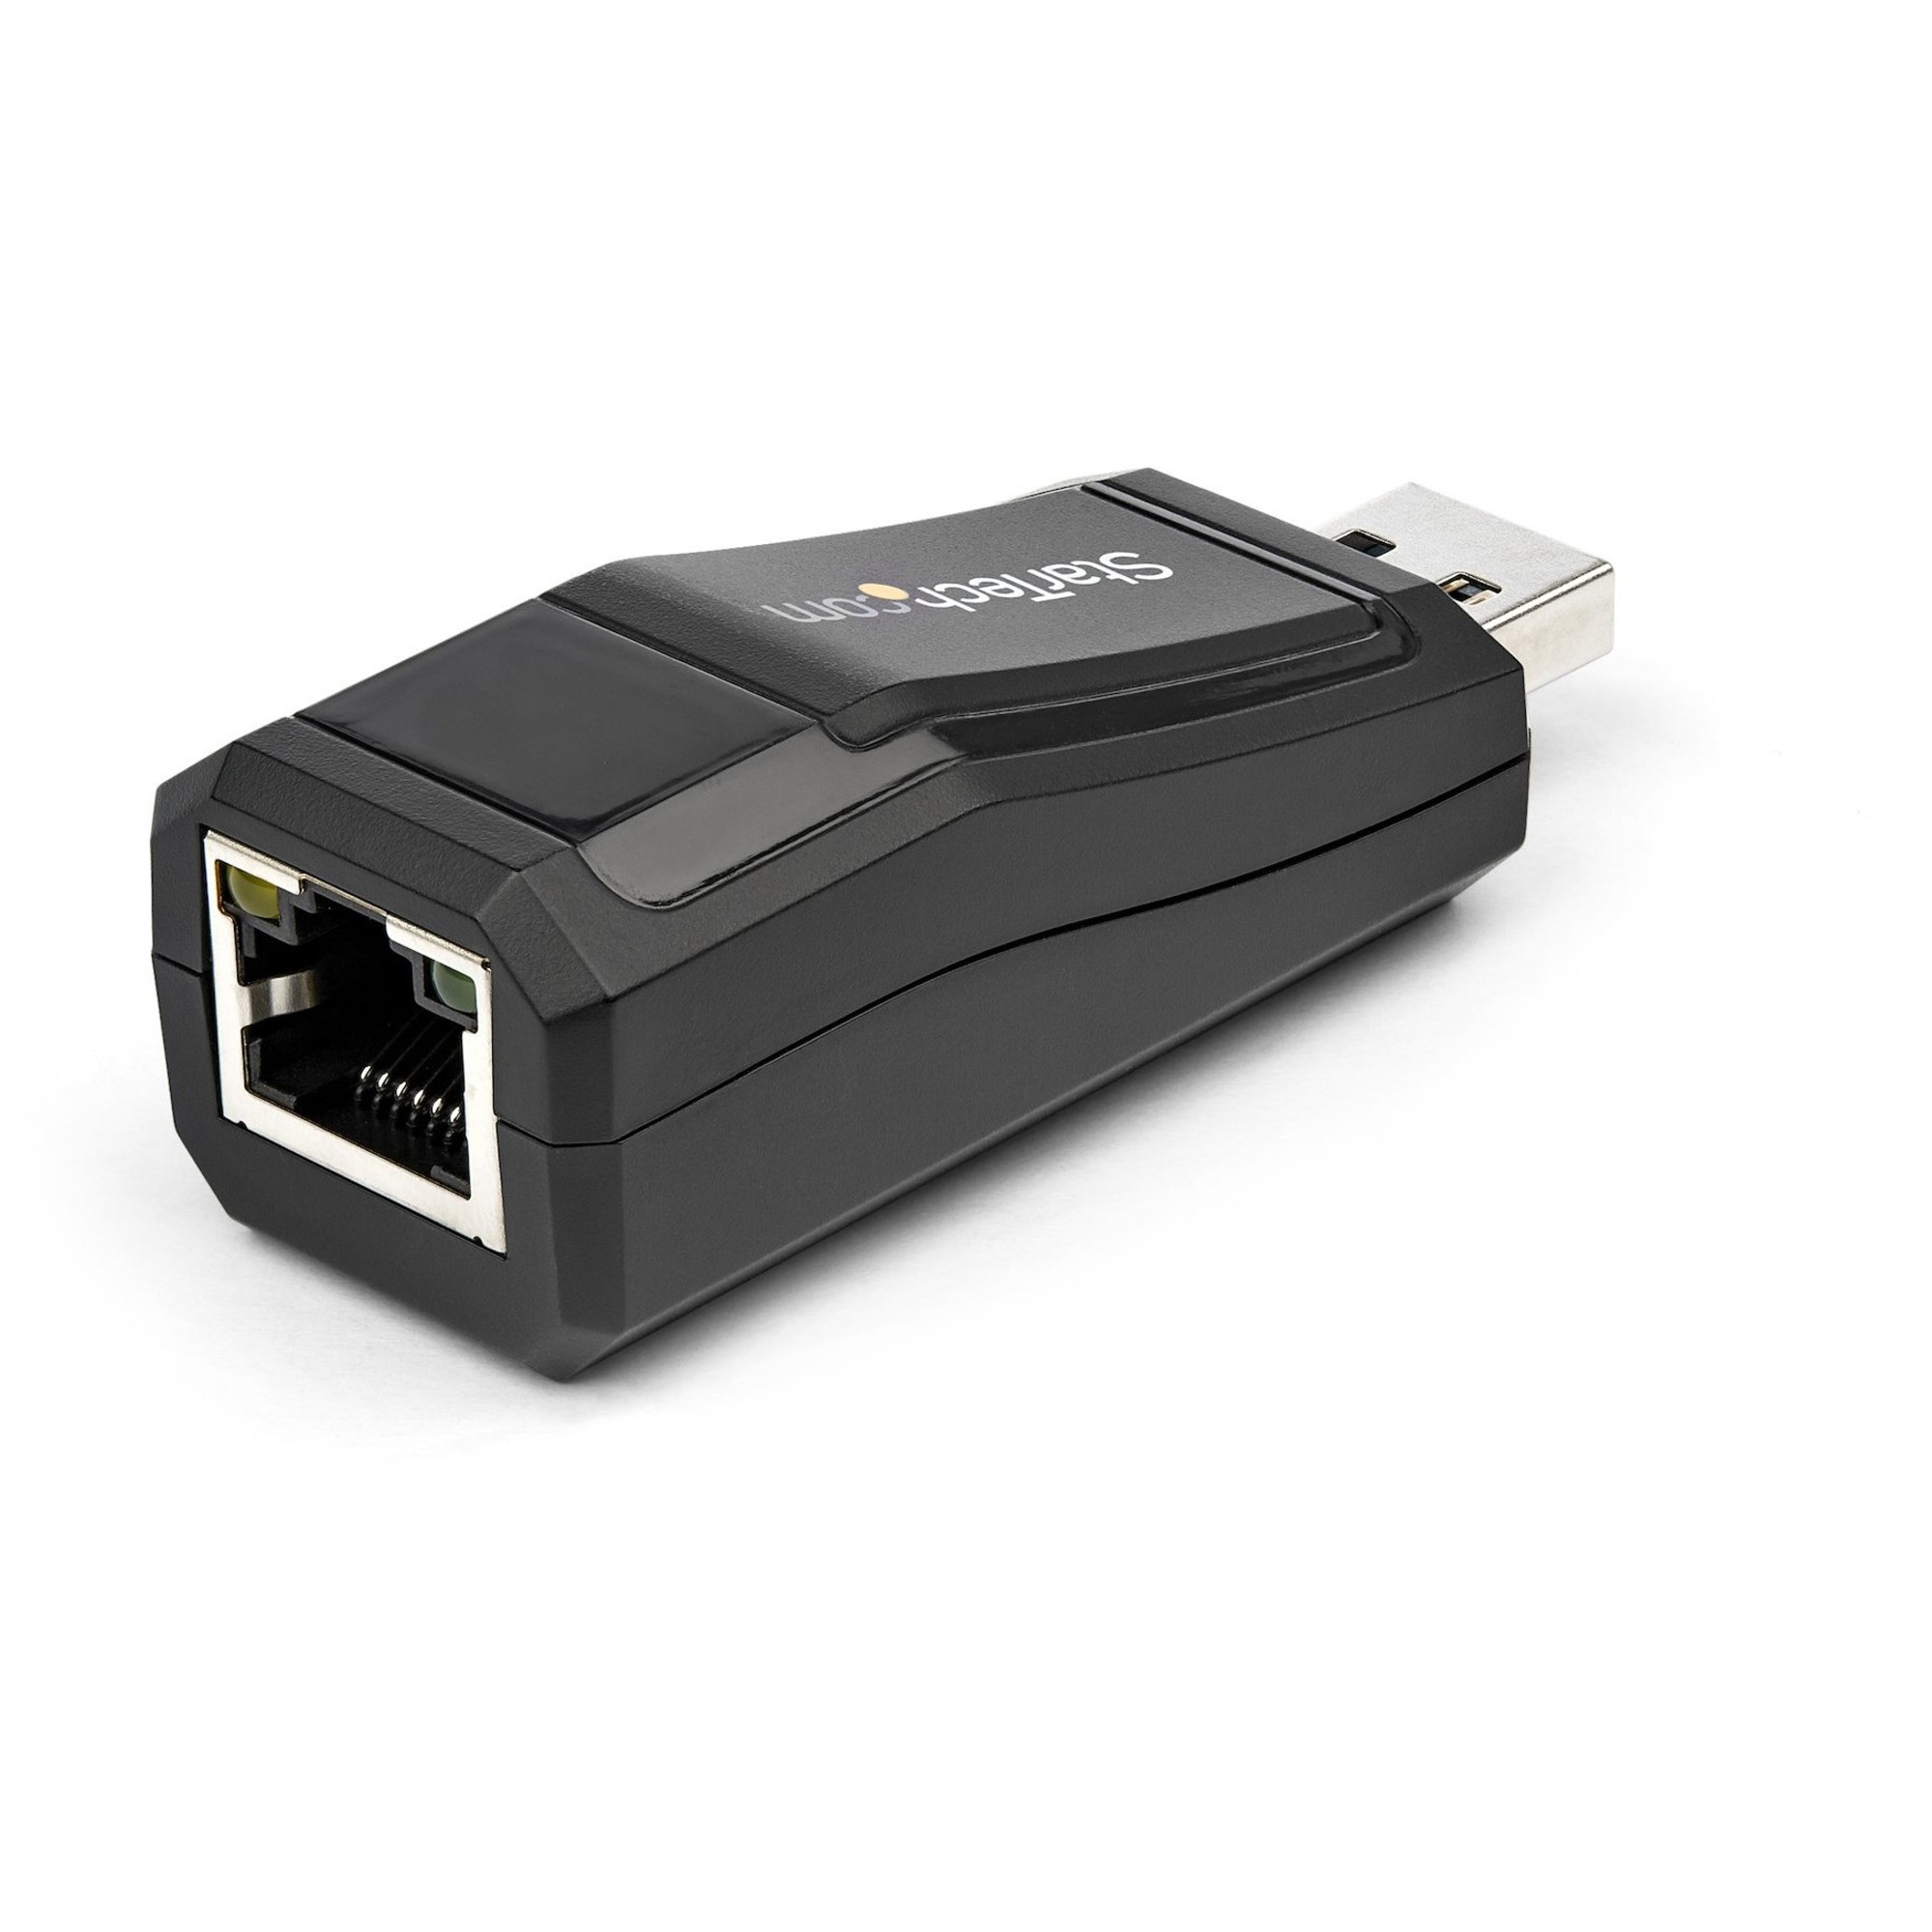 Startech .com USB 3.0 to Gigabit Ethernet NIC Network Adapter ? 10/100/1000  MbpsAdd Gigabit Ethernet network connectivity to a Laptop or D  USB31000NDS - Corporate Armor